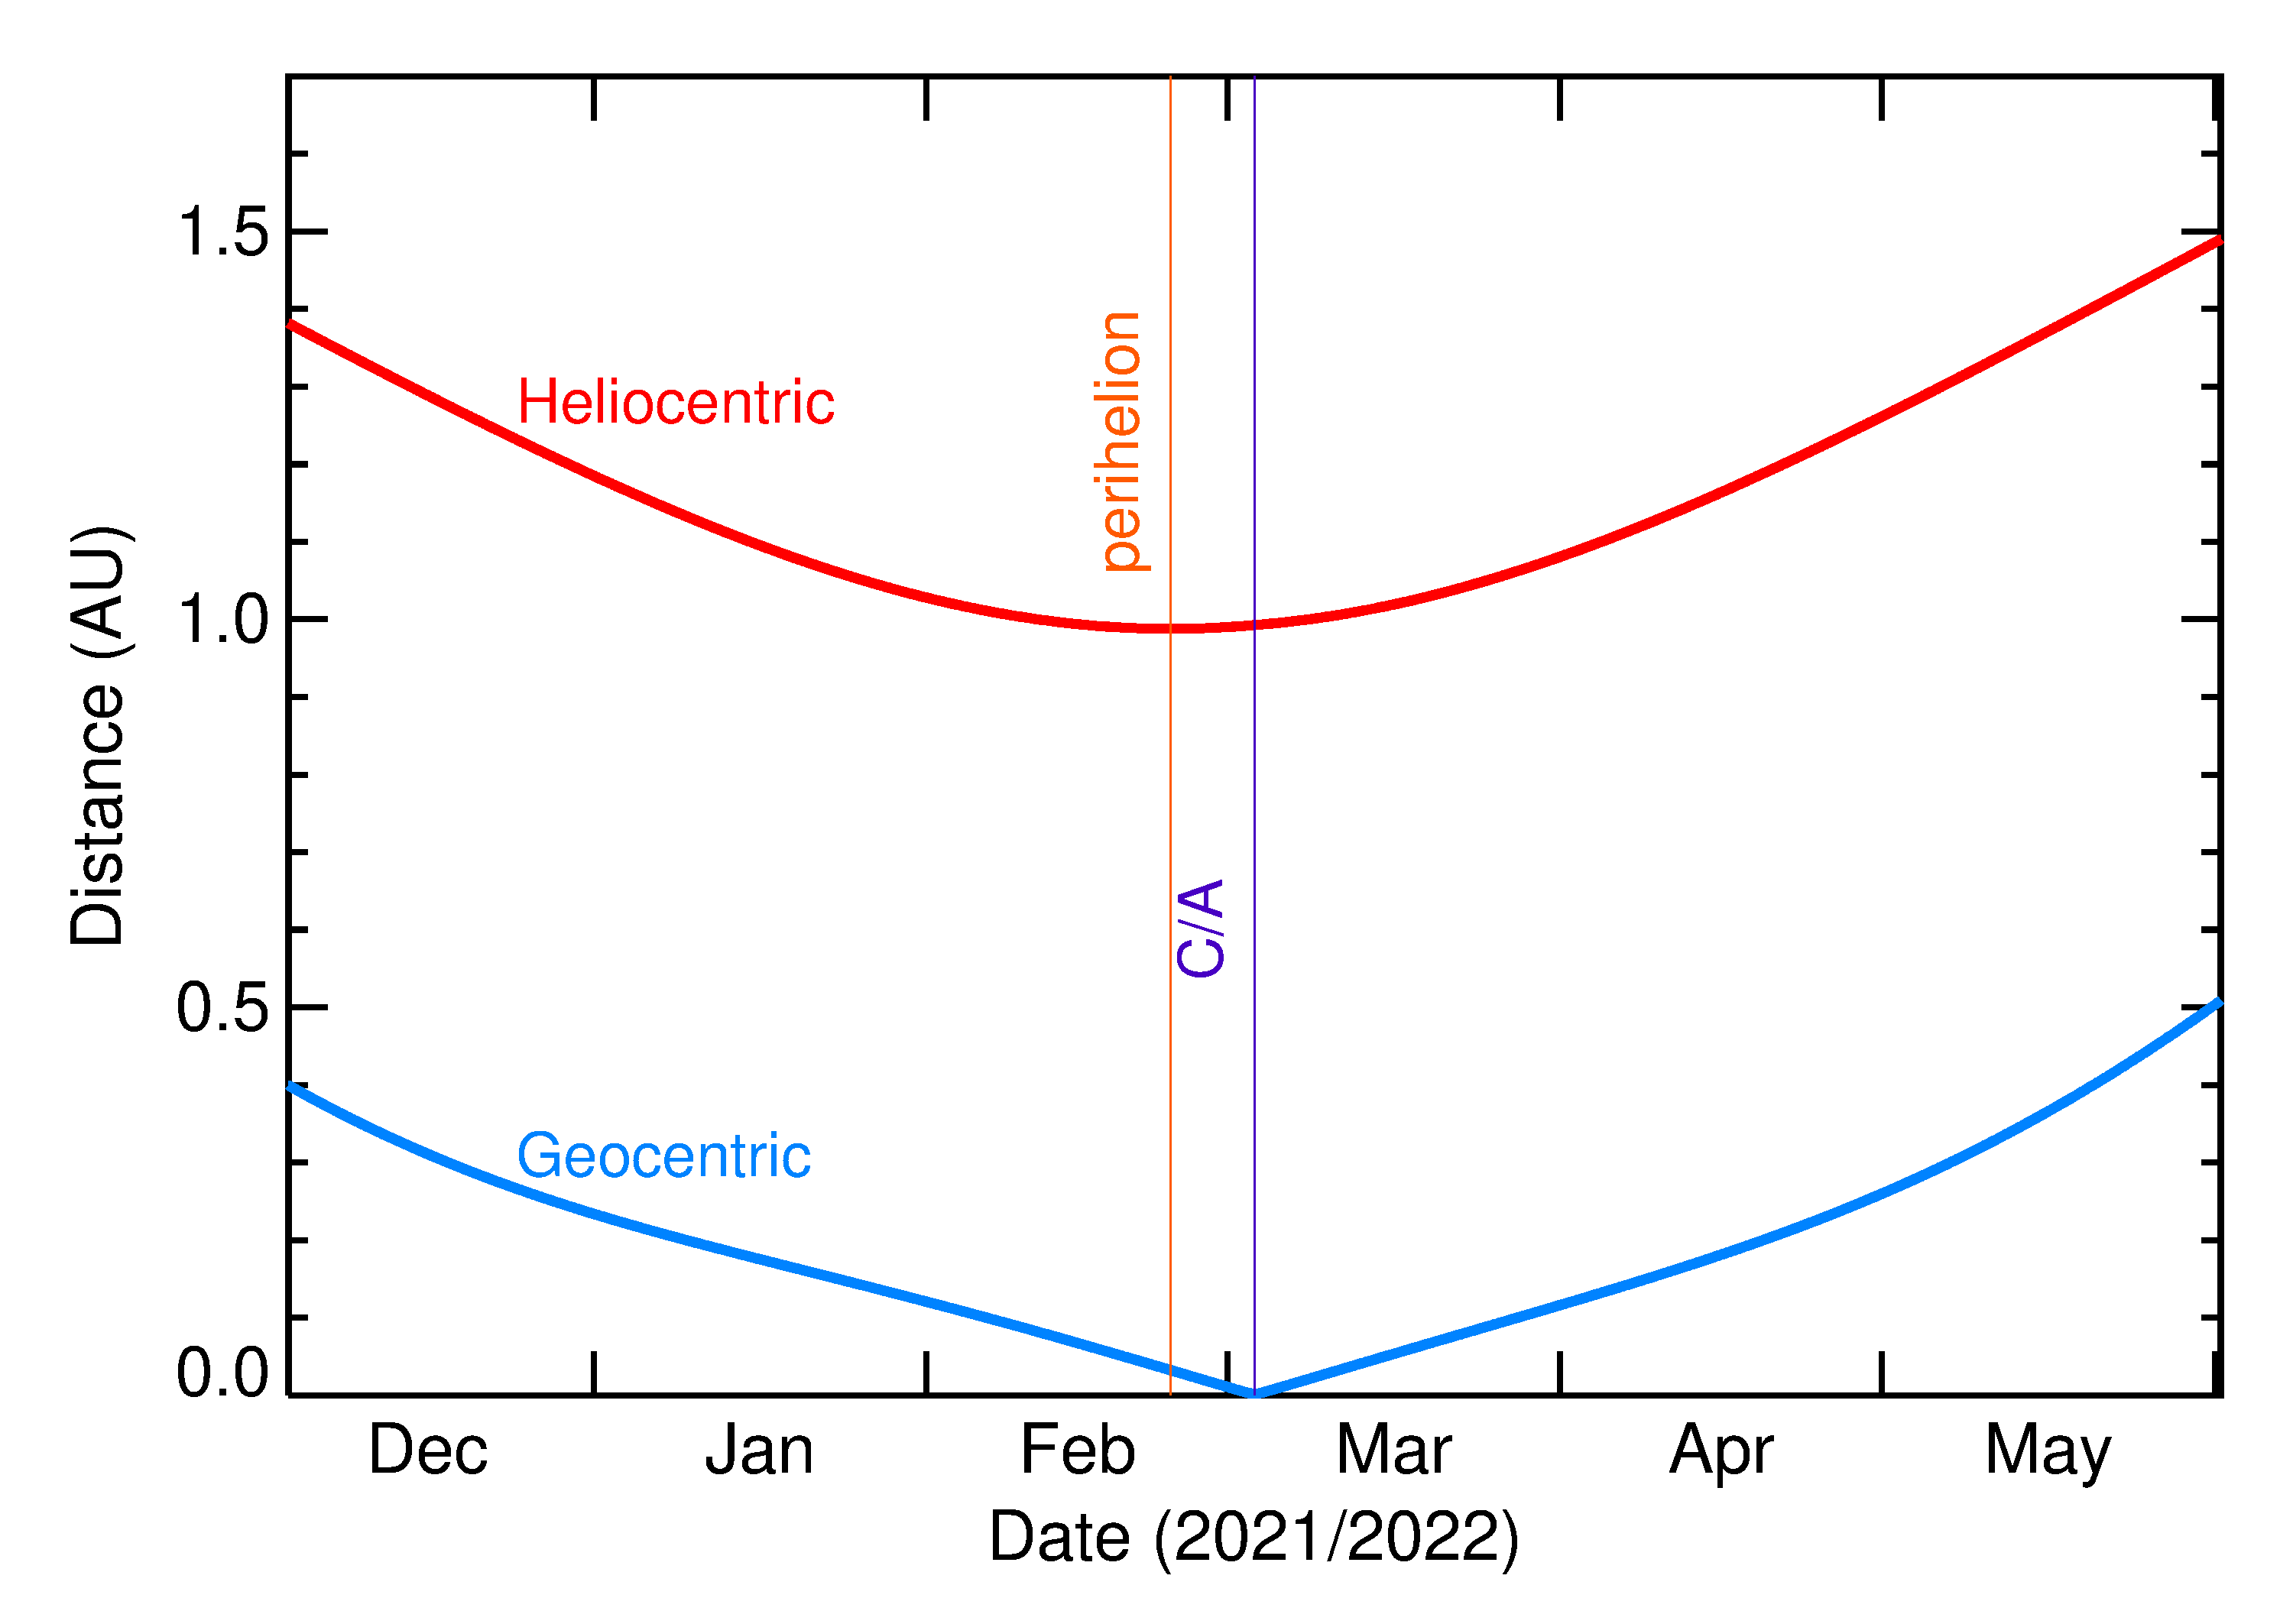 Heliocentric and Geocentric Distances of 2022 ET in the months around closest approach